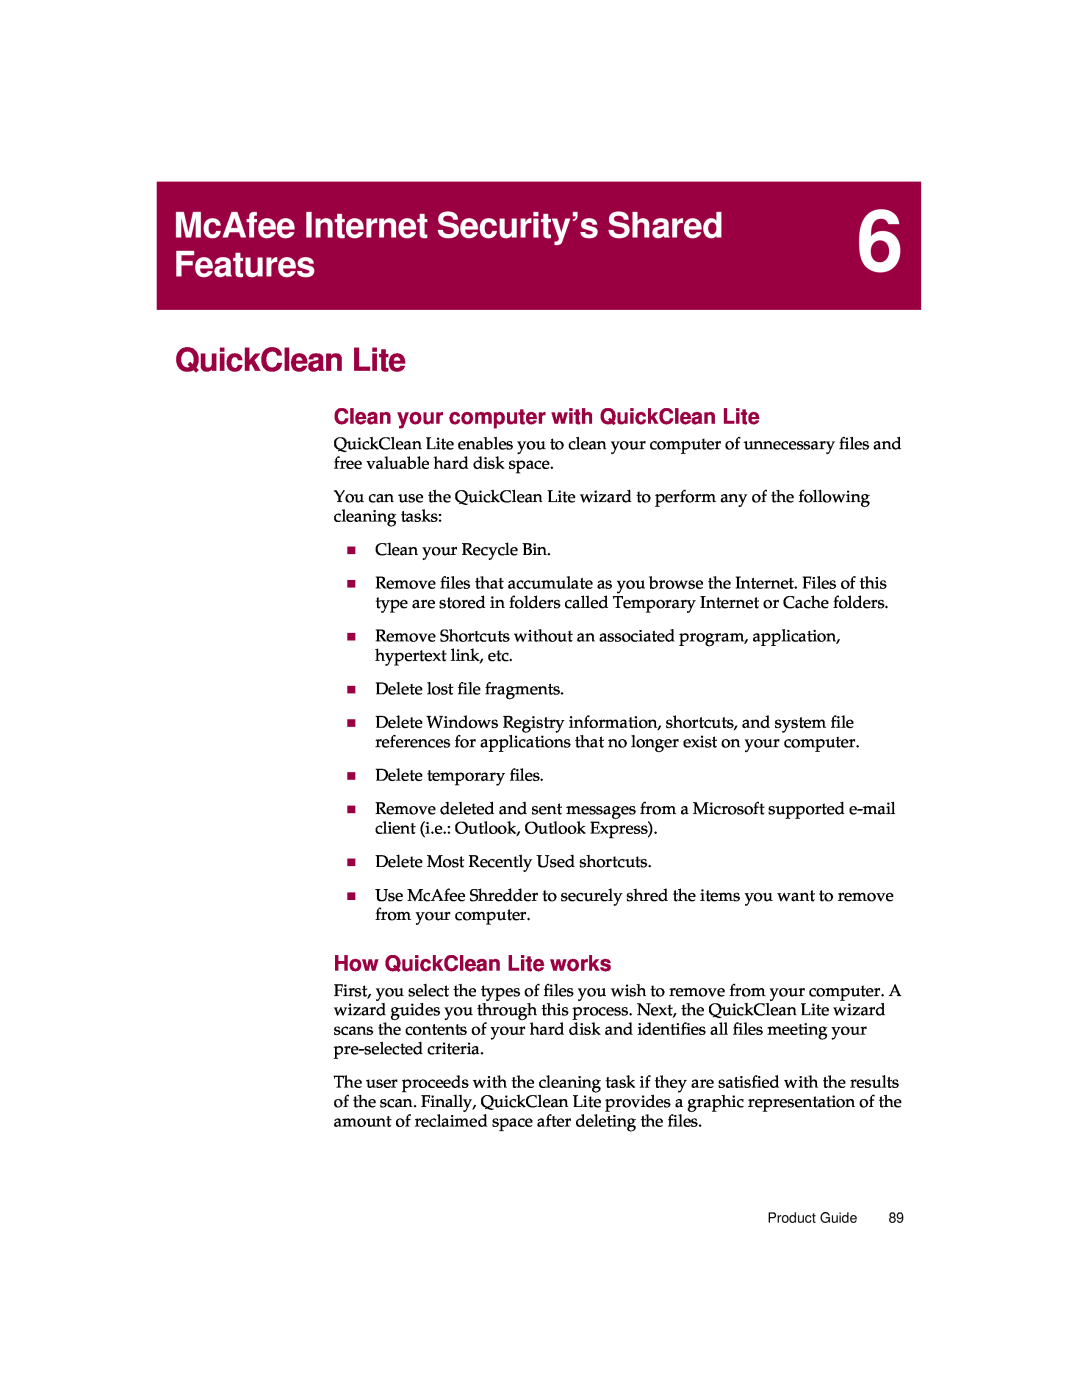 McAfee 5 manual McAfee Internet Security’s Shared, Features, Clean your computer with QuickClean Lite 